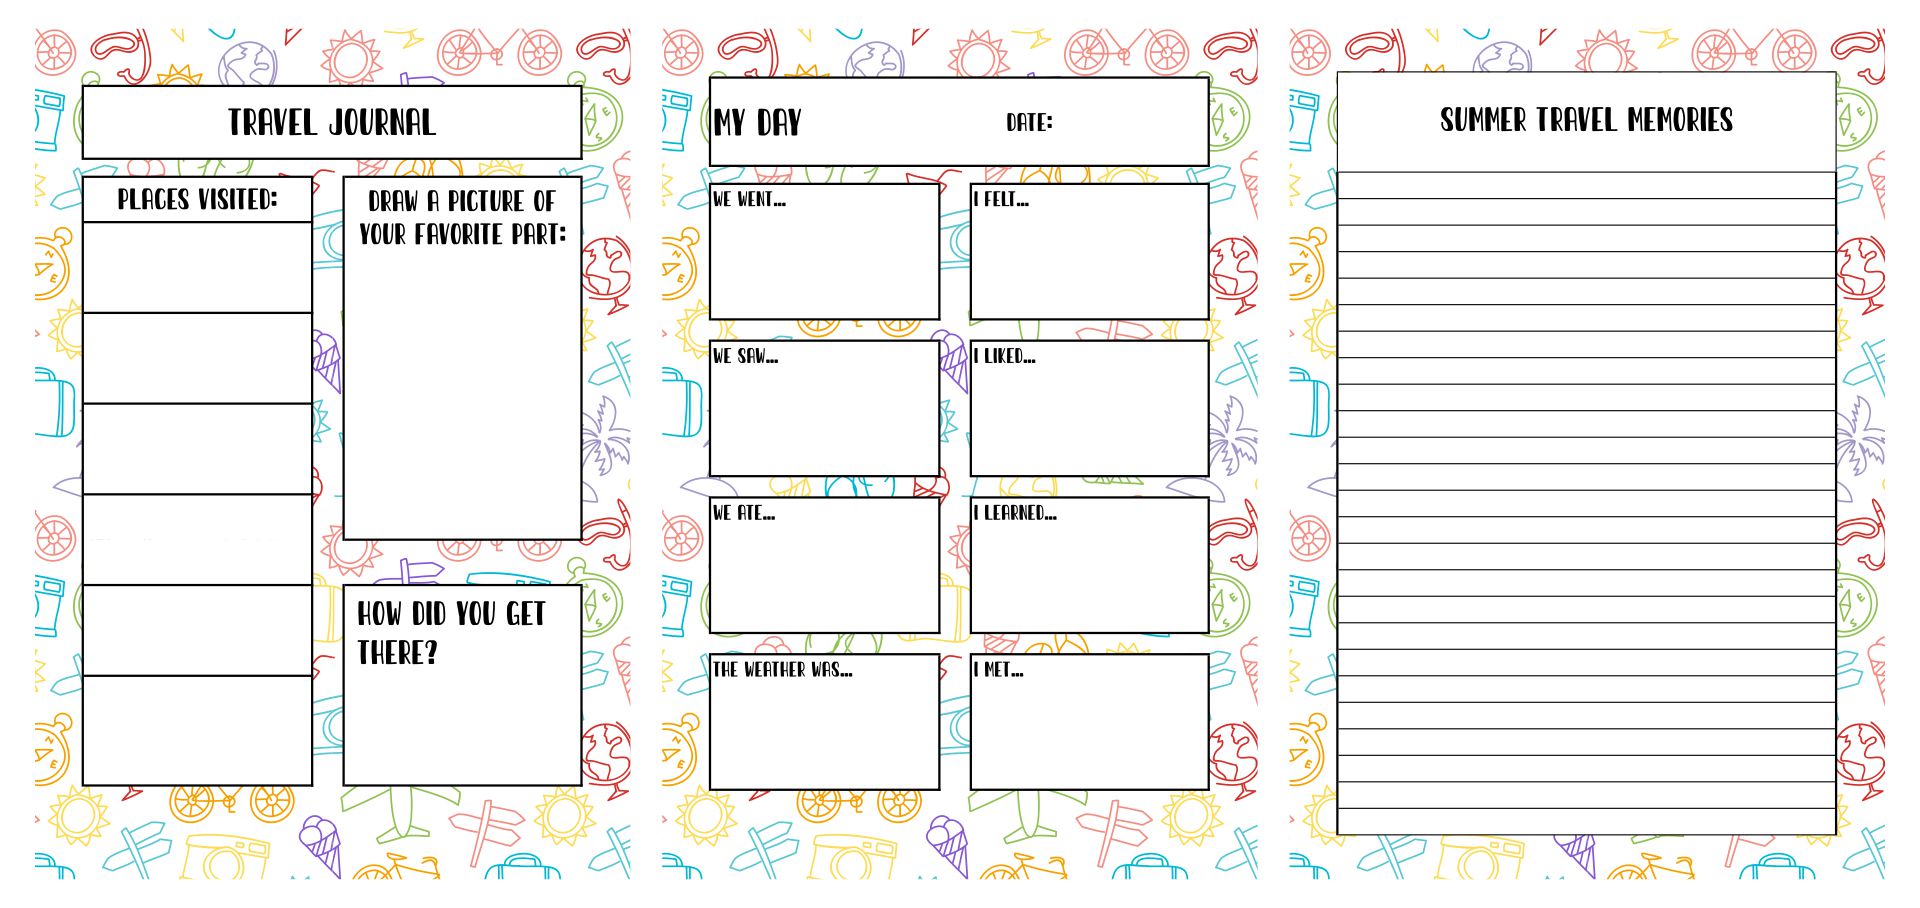 7 Best Images of Travel Journal Printable Template Free Printable